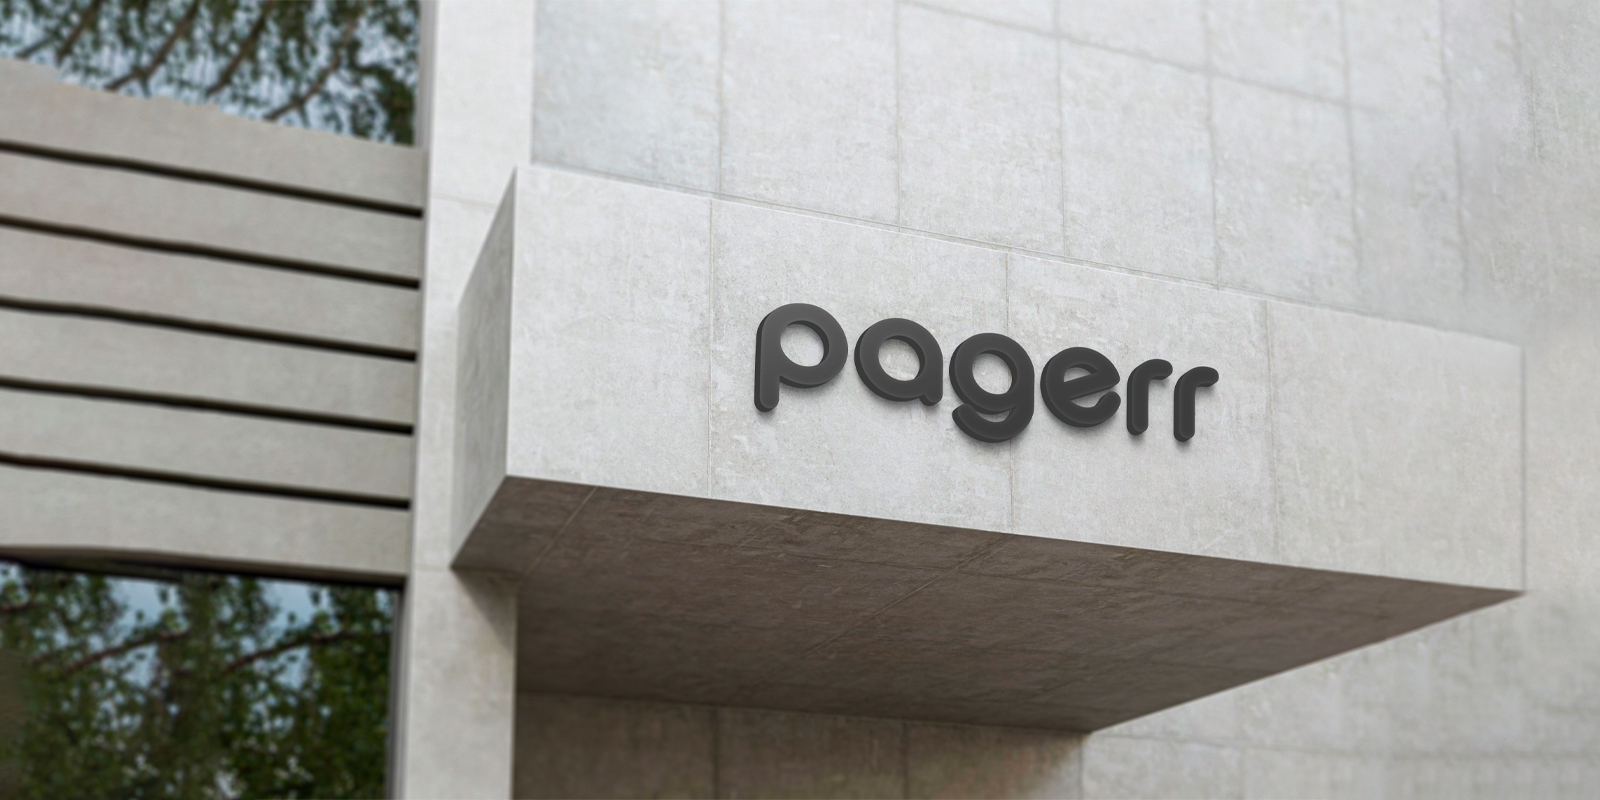 Logo signs in Barcelona - Print with Pagerr